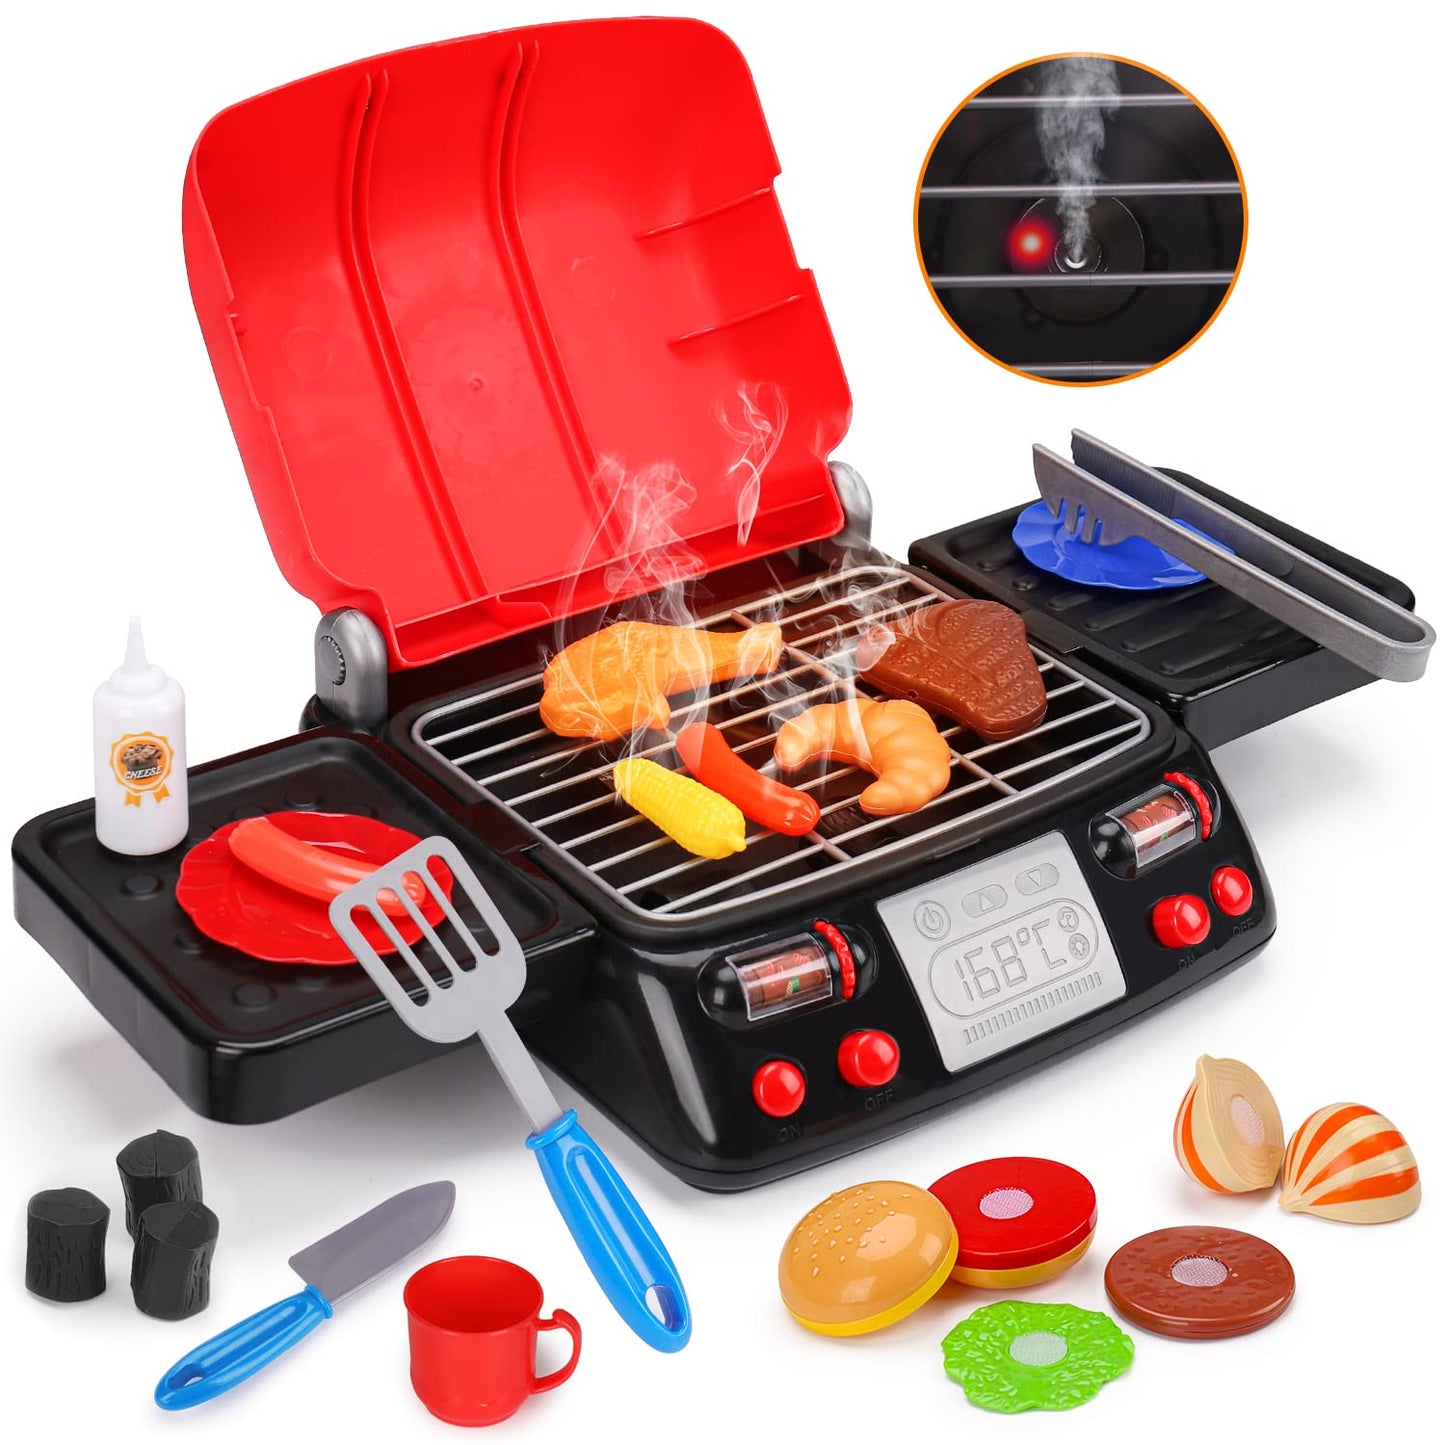 Kids’ BBQ Grill Playset: Interactive Camping Cooking Set with Pretend Smoke, Sound & Light – Perfect for Ages 2-6